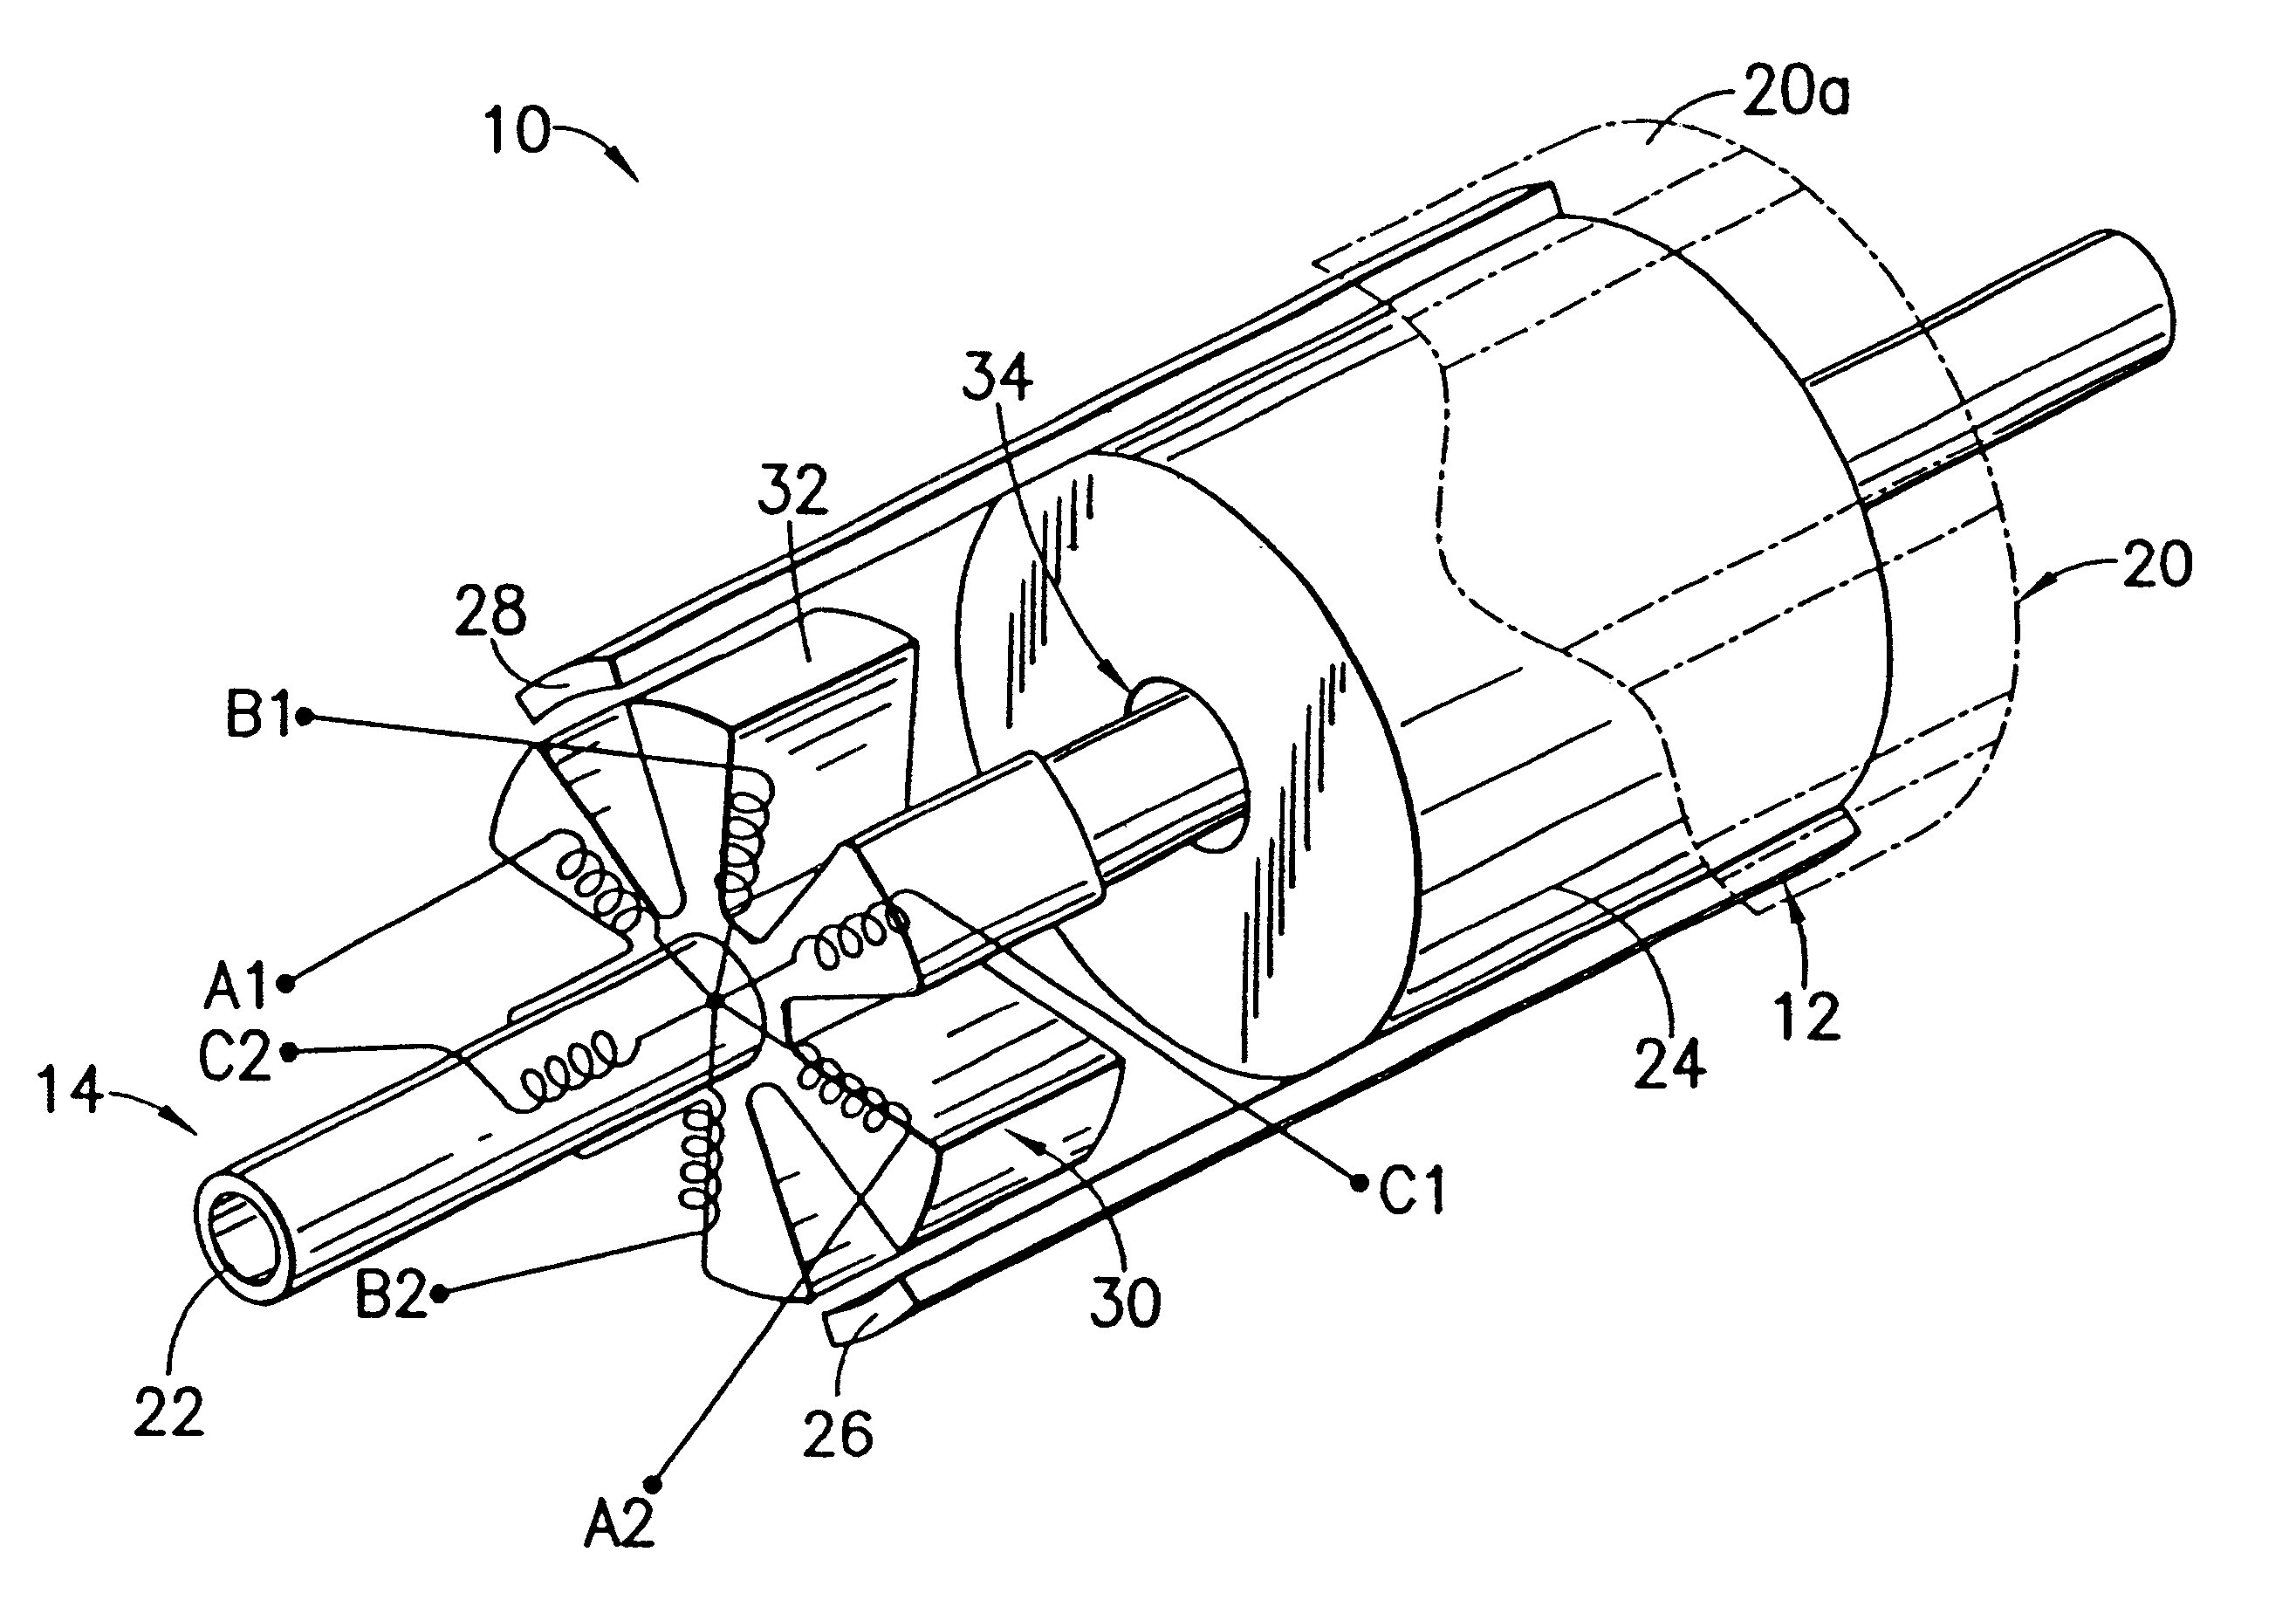 Transducer featuring magnetic rotor concentrically arranged in relation to multi-phase coil